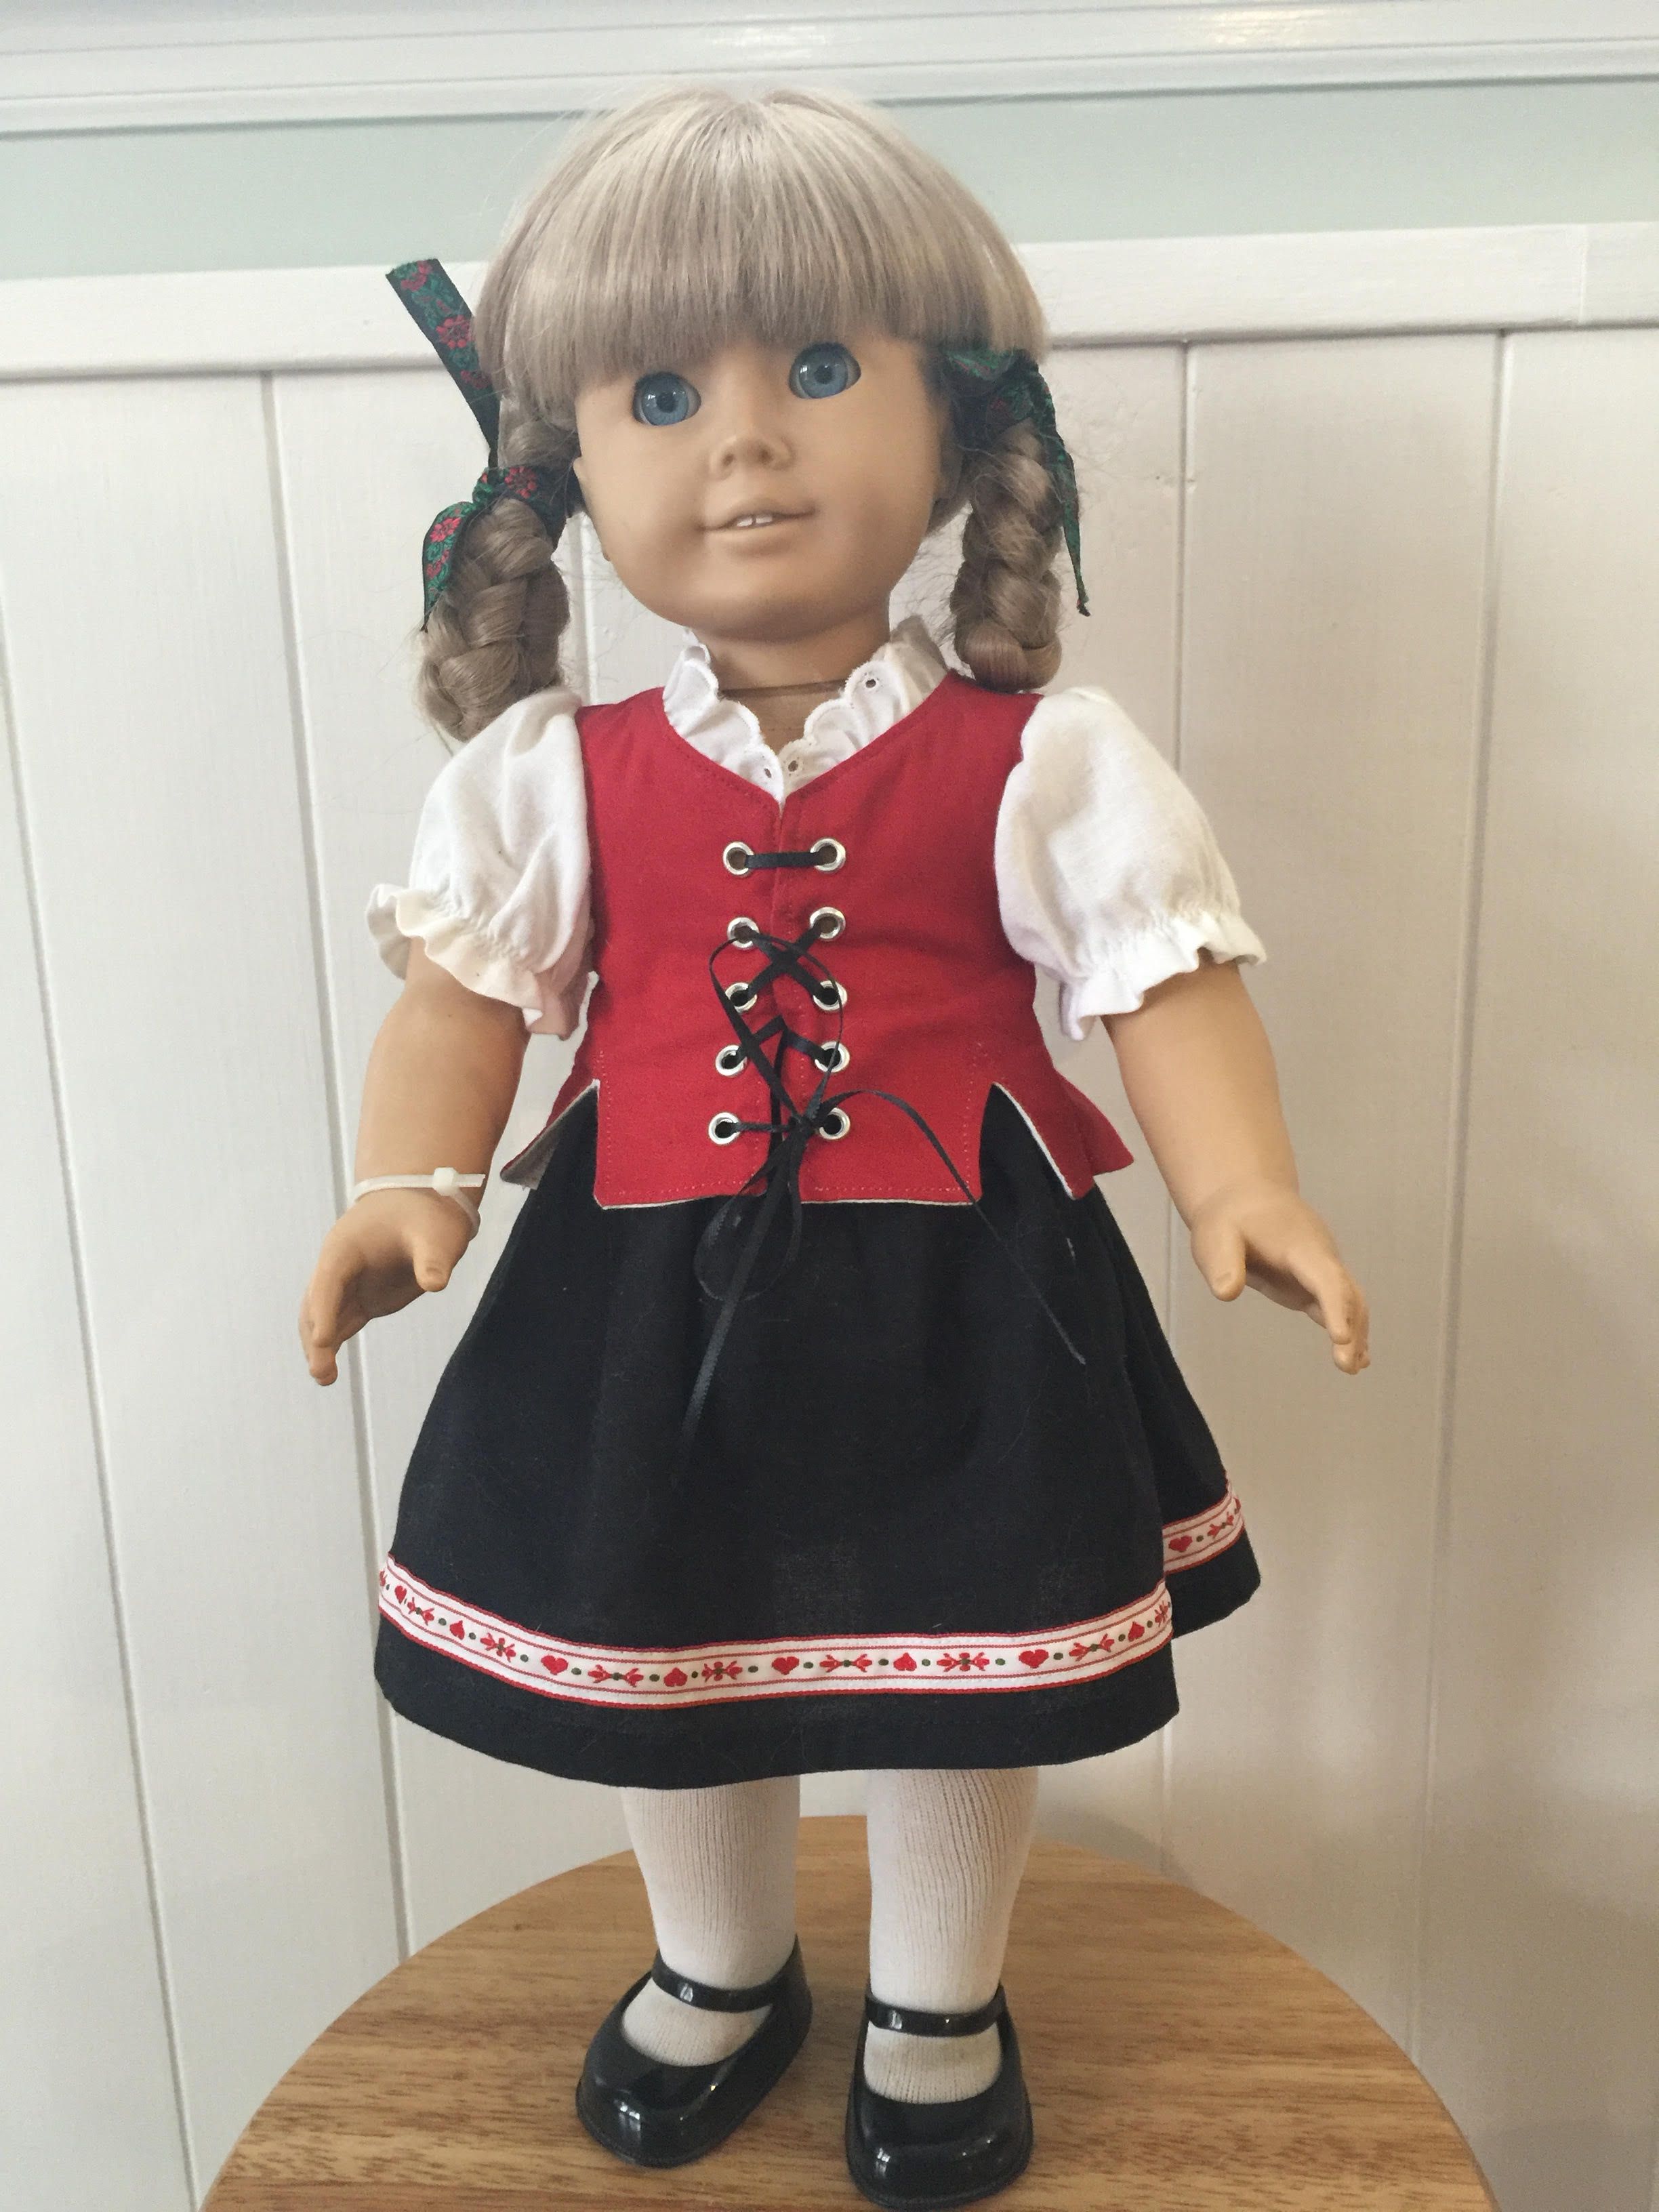 Green Acres Doll Clothes